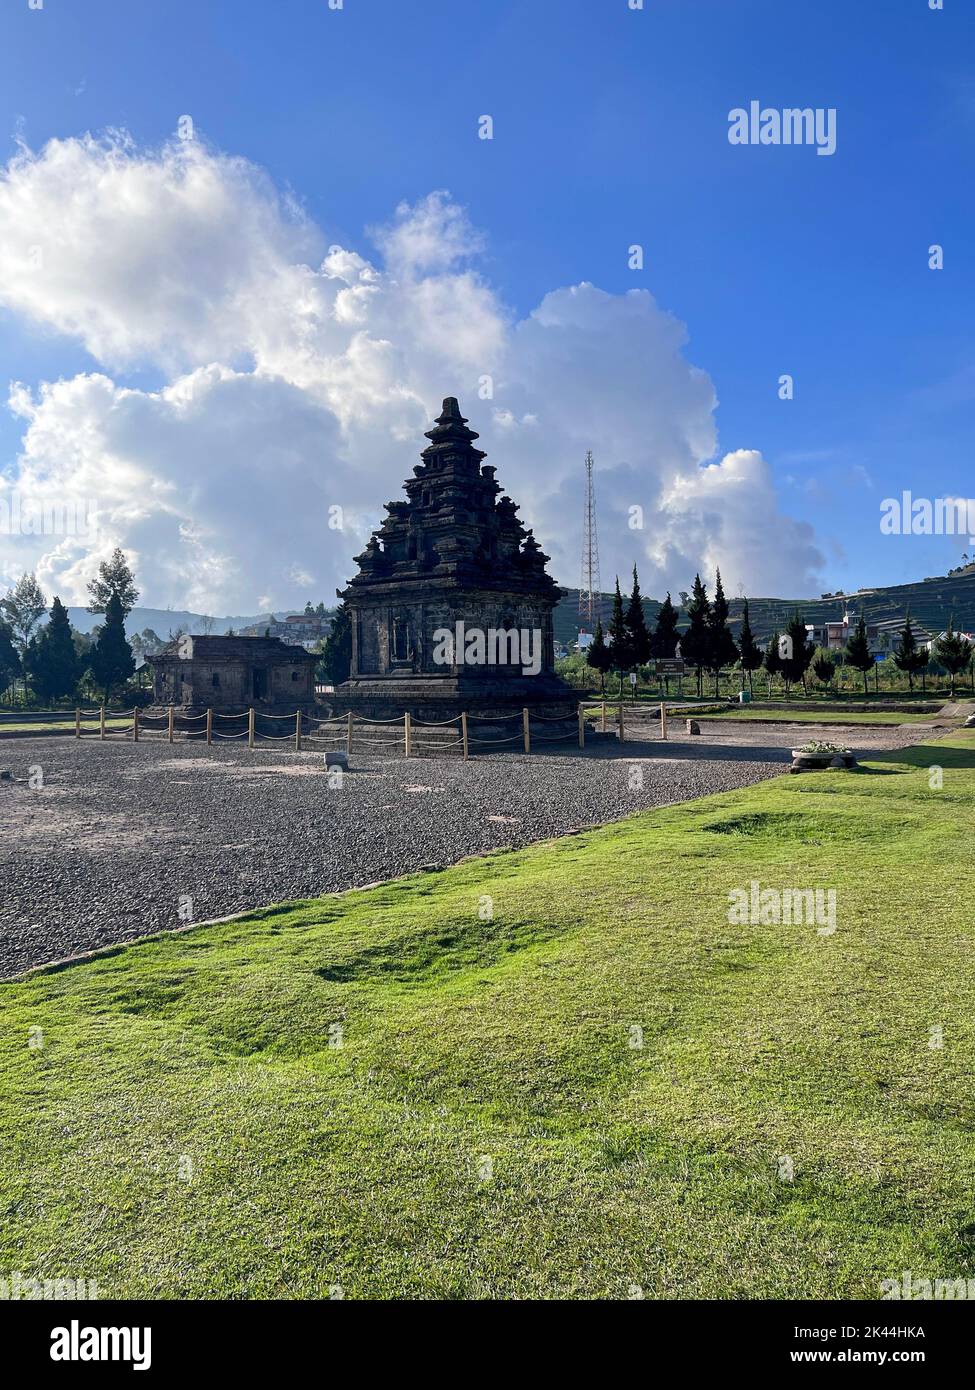 Local tourists visit Arjuna temple complex at Dieng Plateau. Wonosobo, Indonesia, September 30, 2022 Stock Photo